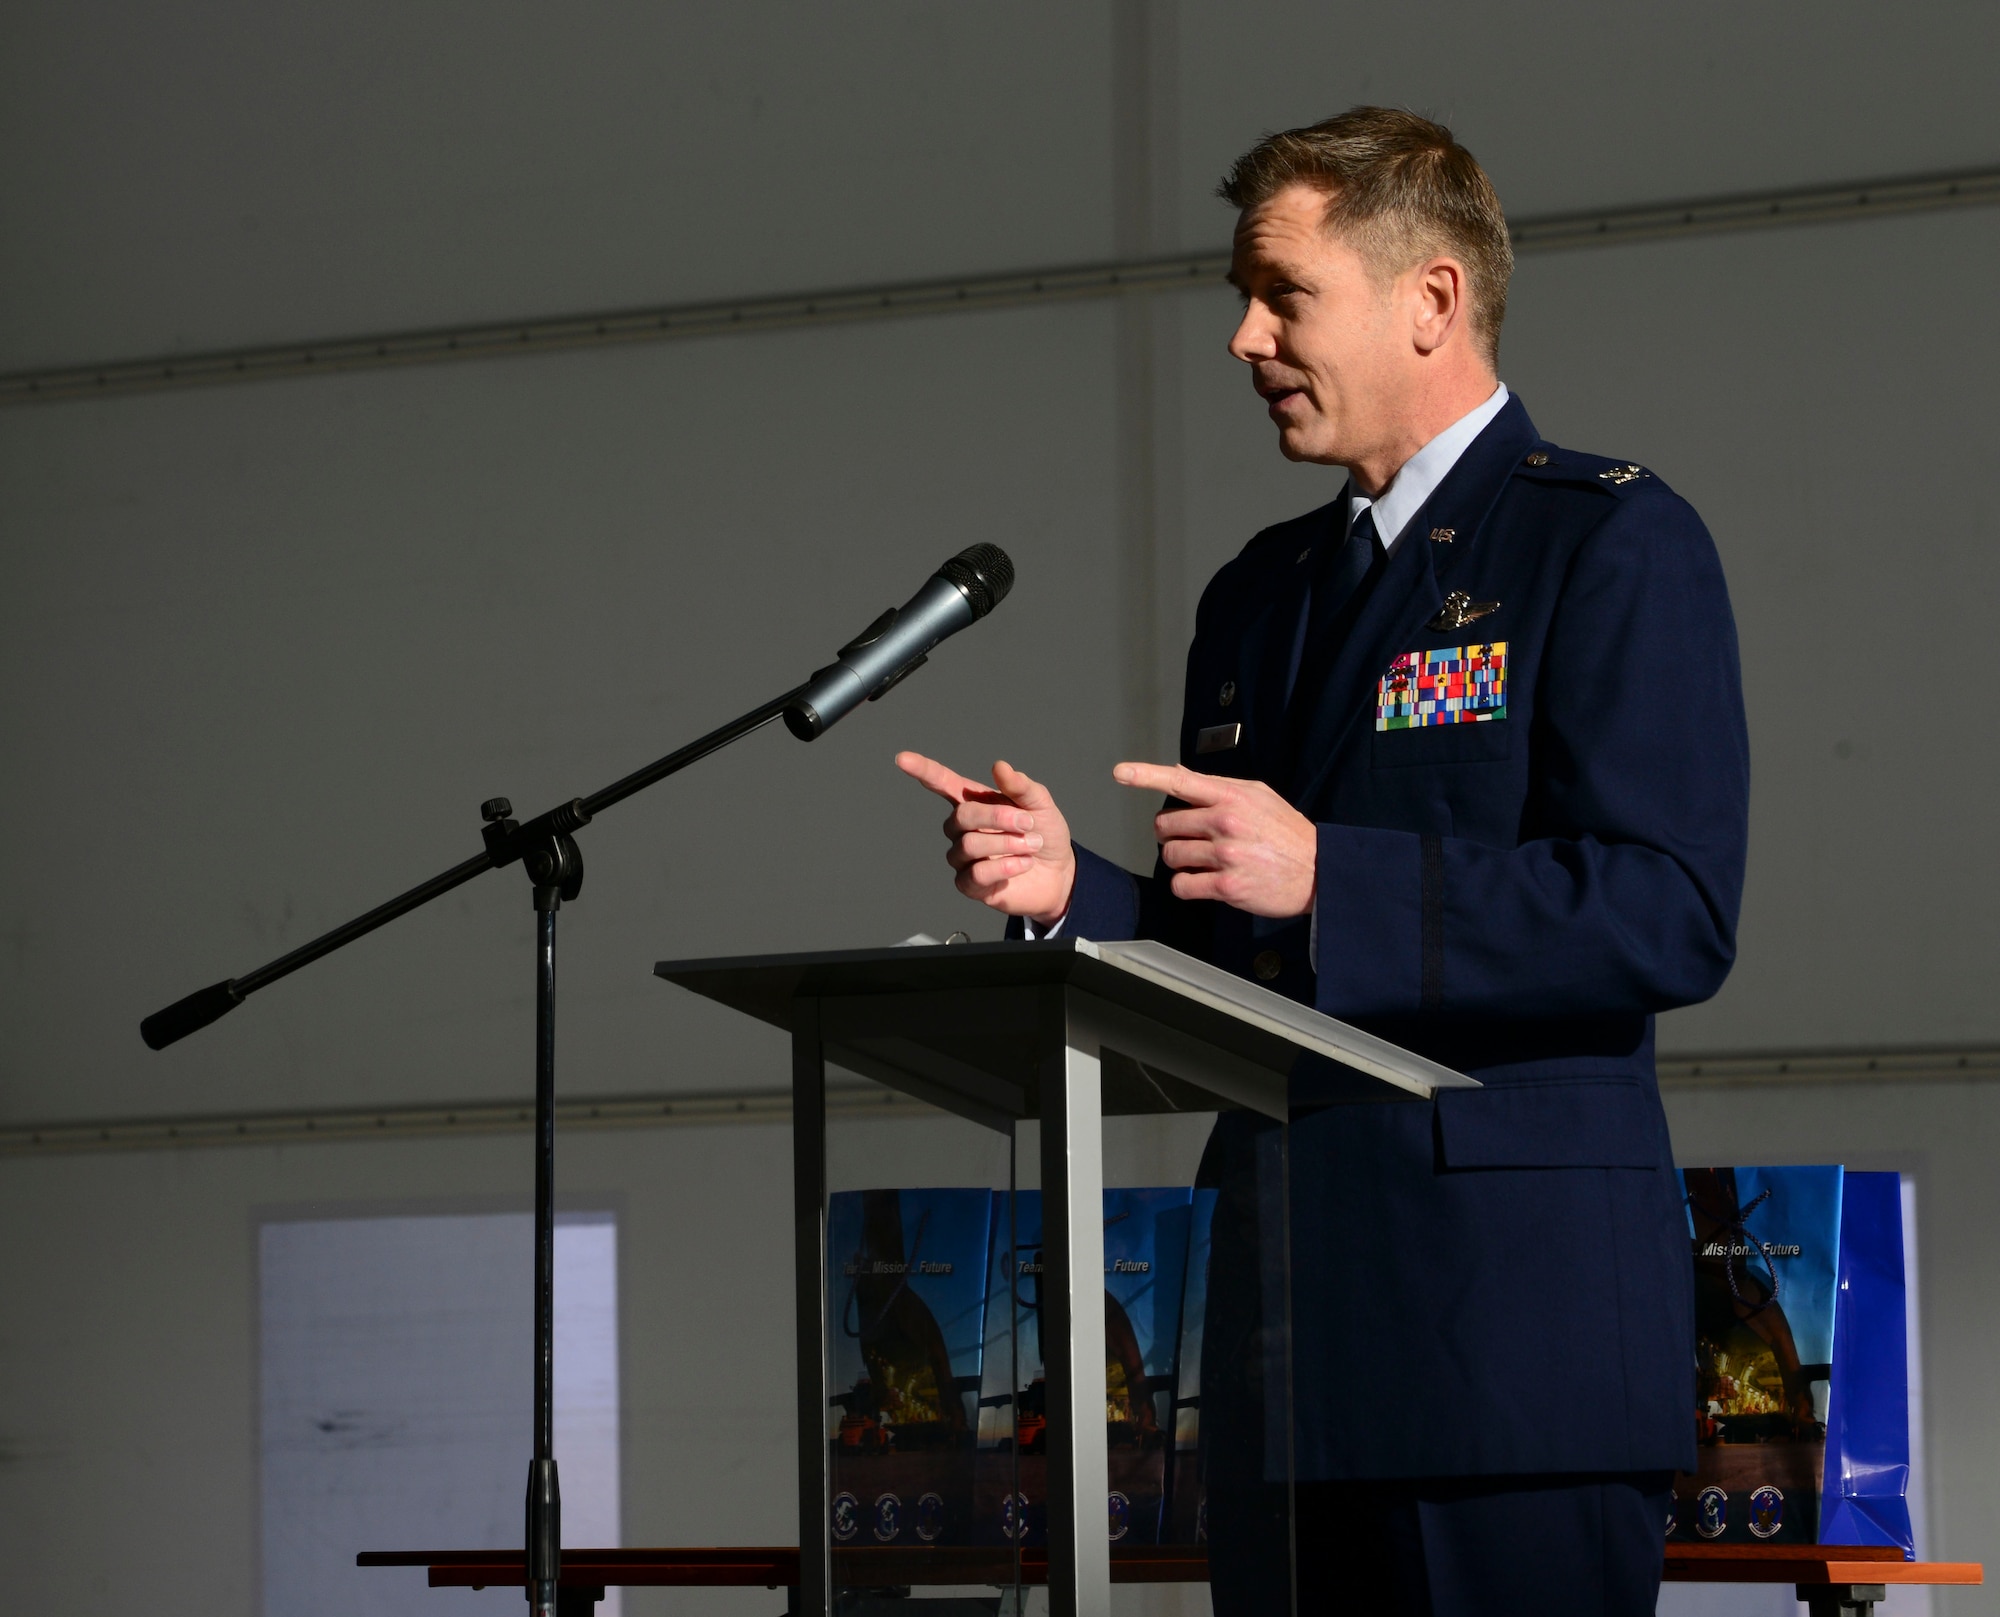 U.S. Air Force Col. Trevor Nitz, Heavy Airlift Wing commander, speaks during a C-17 Globemaster III hangar complex grand opening at Pàpa Air Base, Hungary on Nov. 17, 2016. The first-of-its-kind hangar complex provides space to wash and paint the three C-17s stationed at the HAW, and allows fuel cell, operational and routine maintenance to be performed at any time. (U.S. Air Force photo by Staff Sgt. Krystal Ardrey)